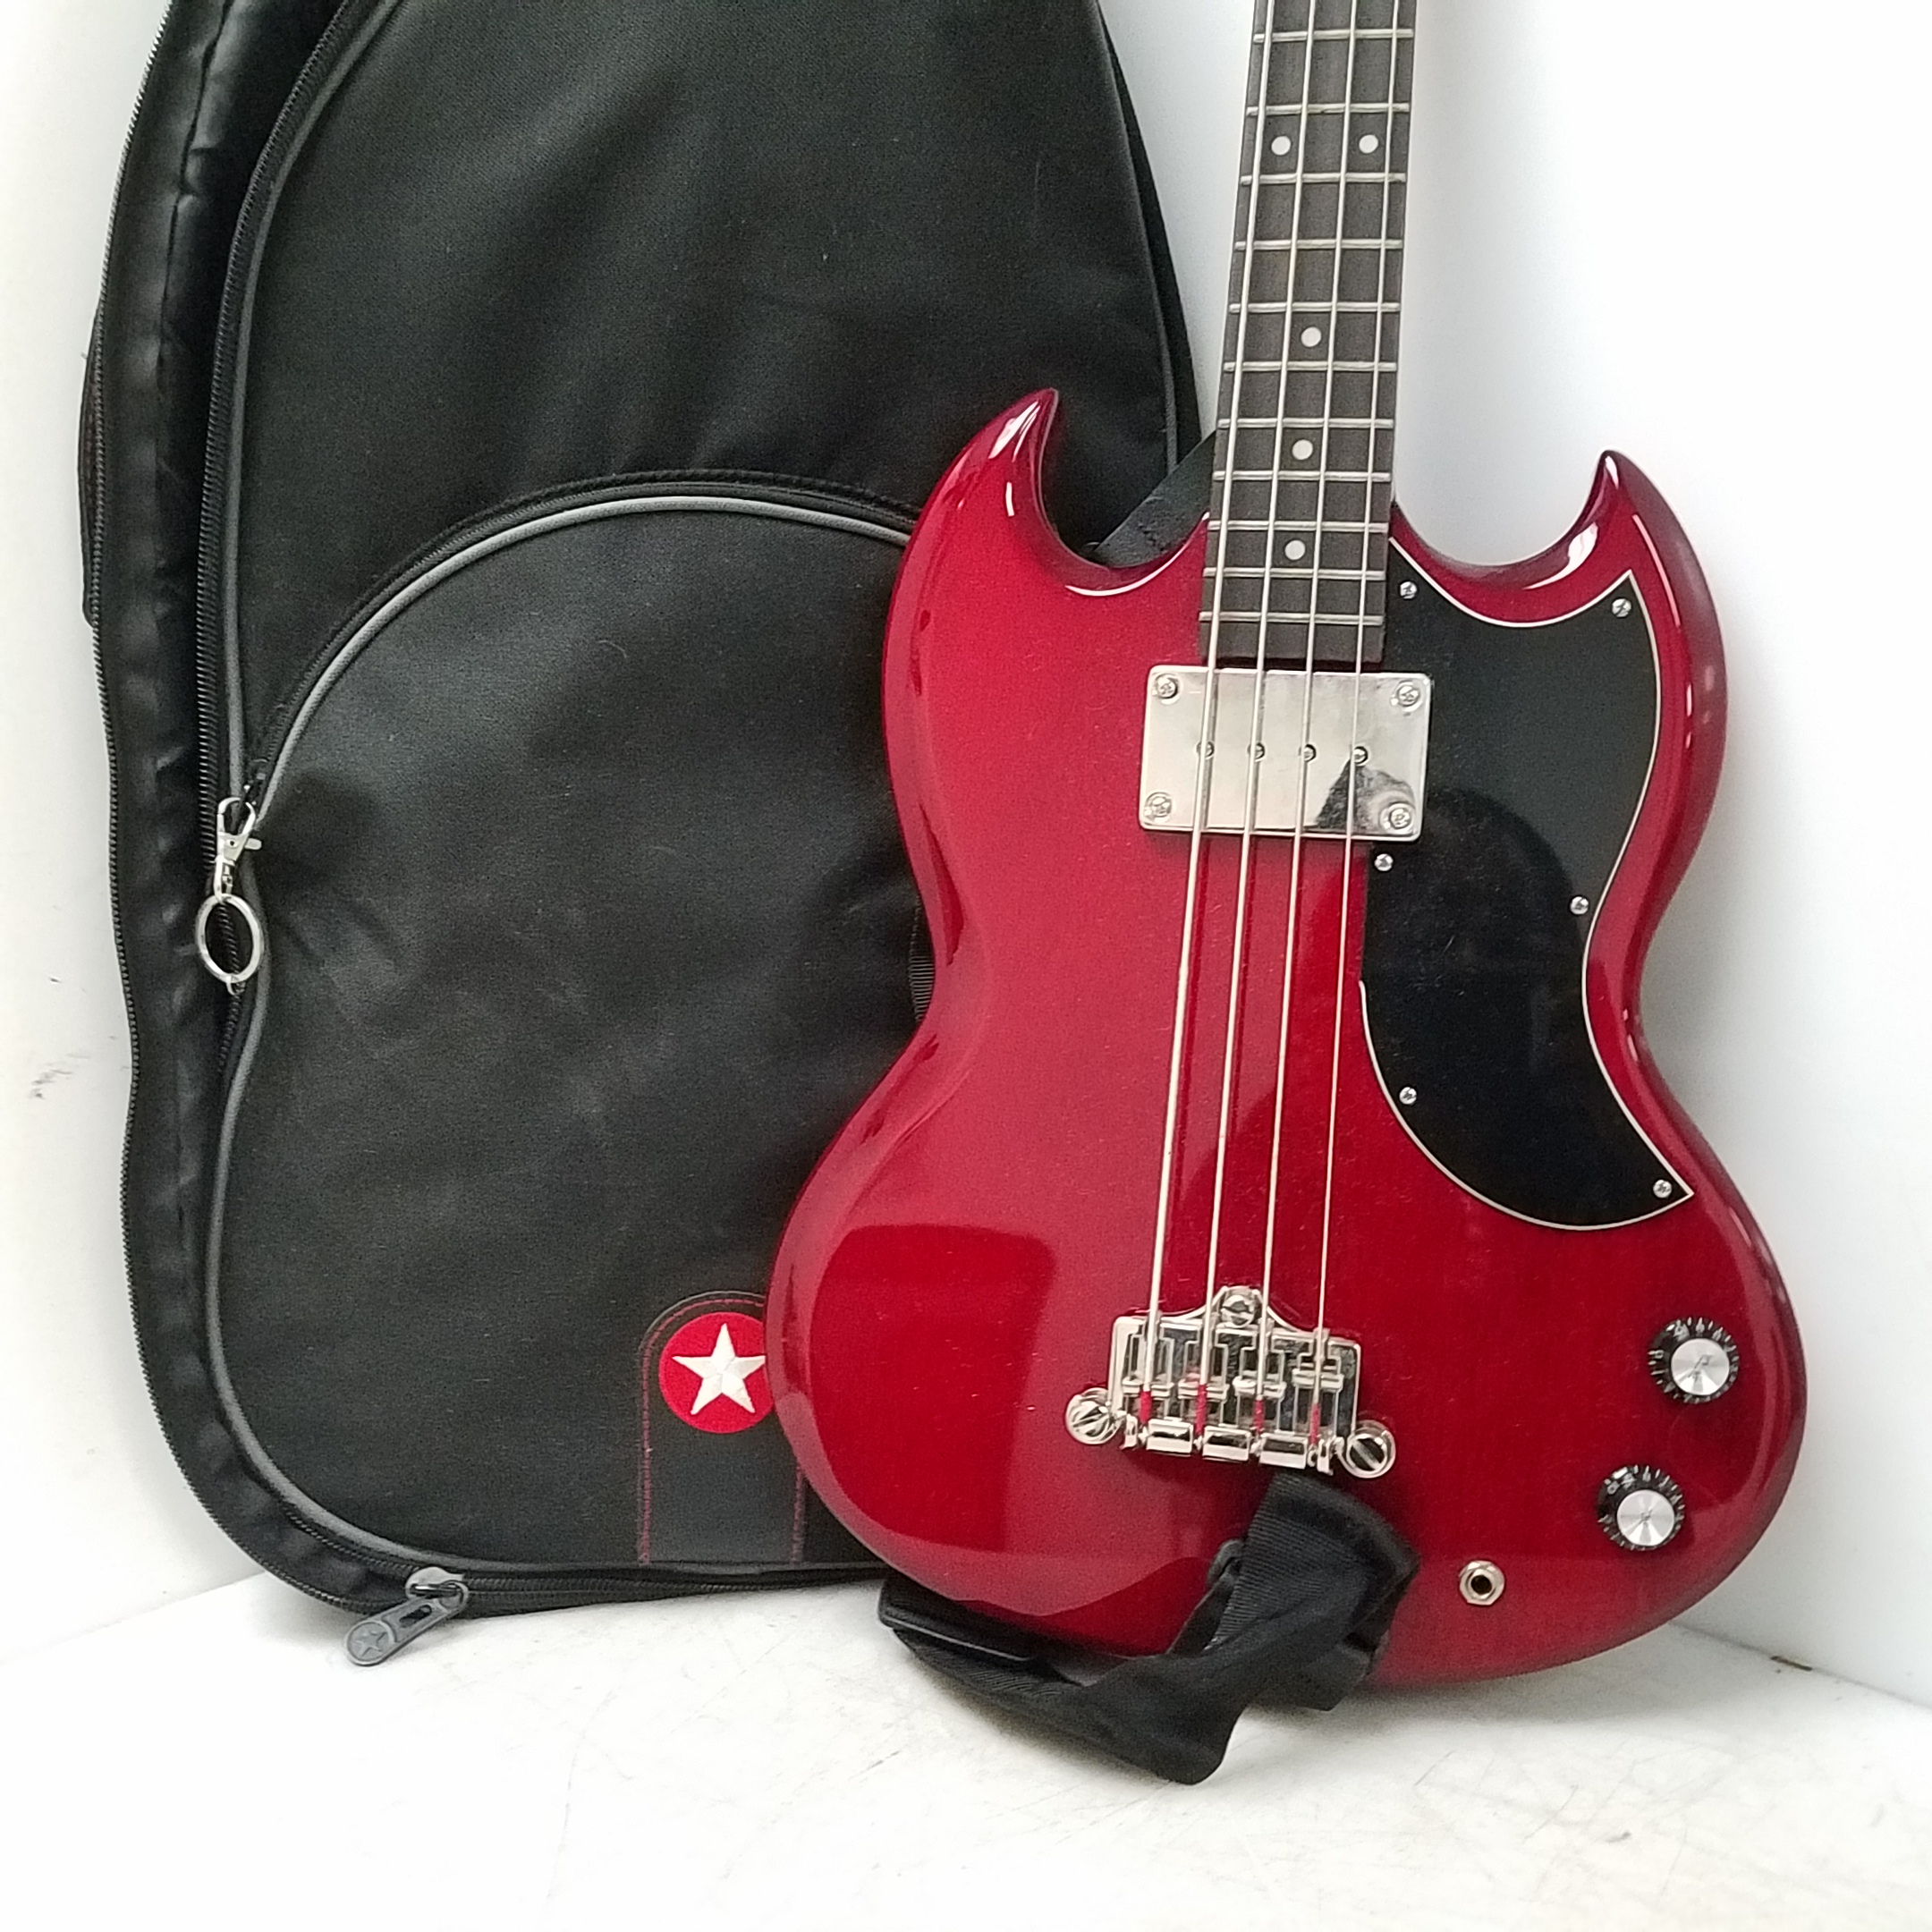 Buy the Epiphone EB3 Electric Bass Guitar Cherry w Roadrunner Gig